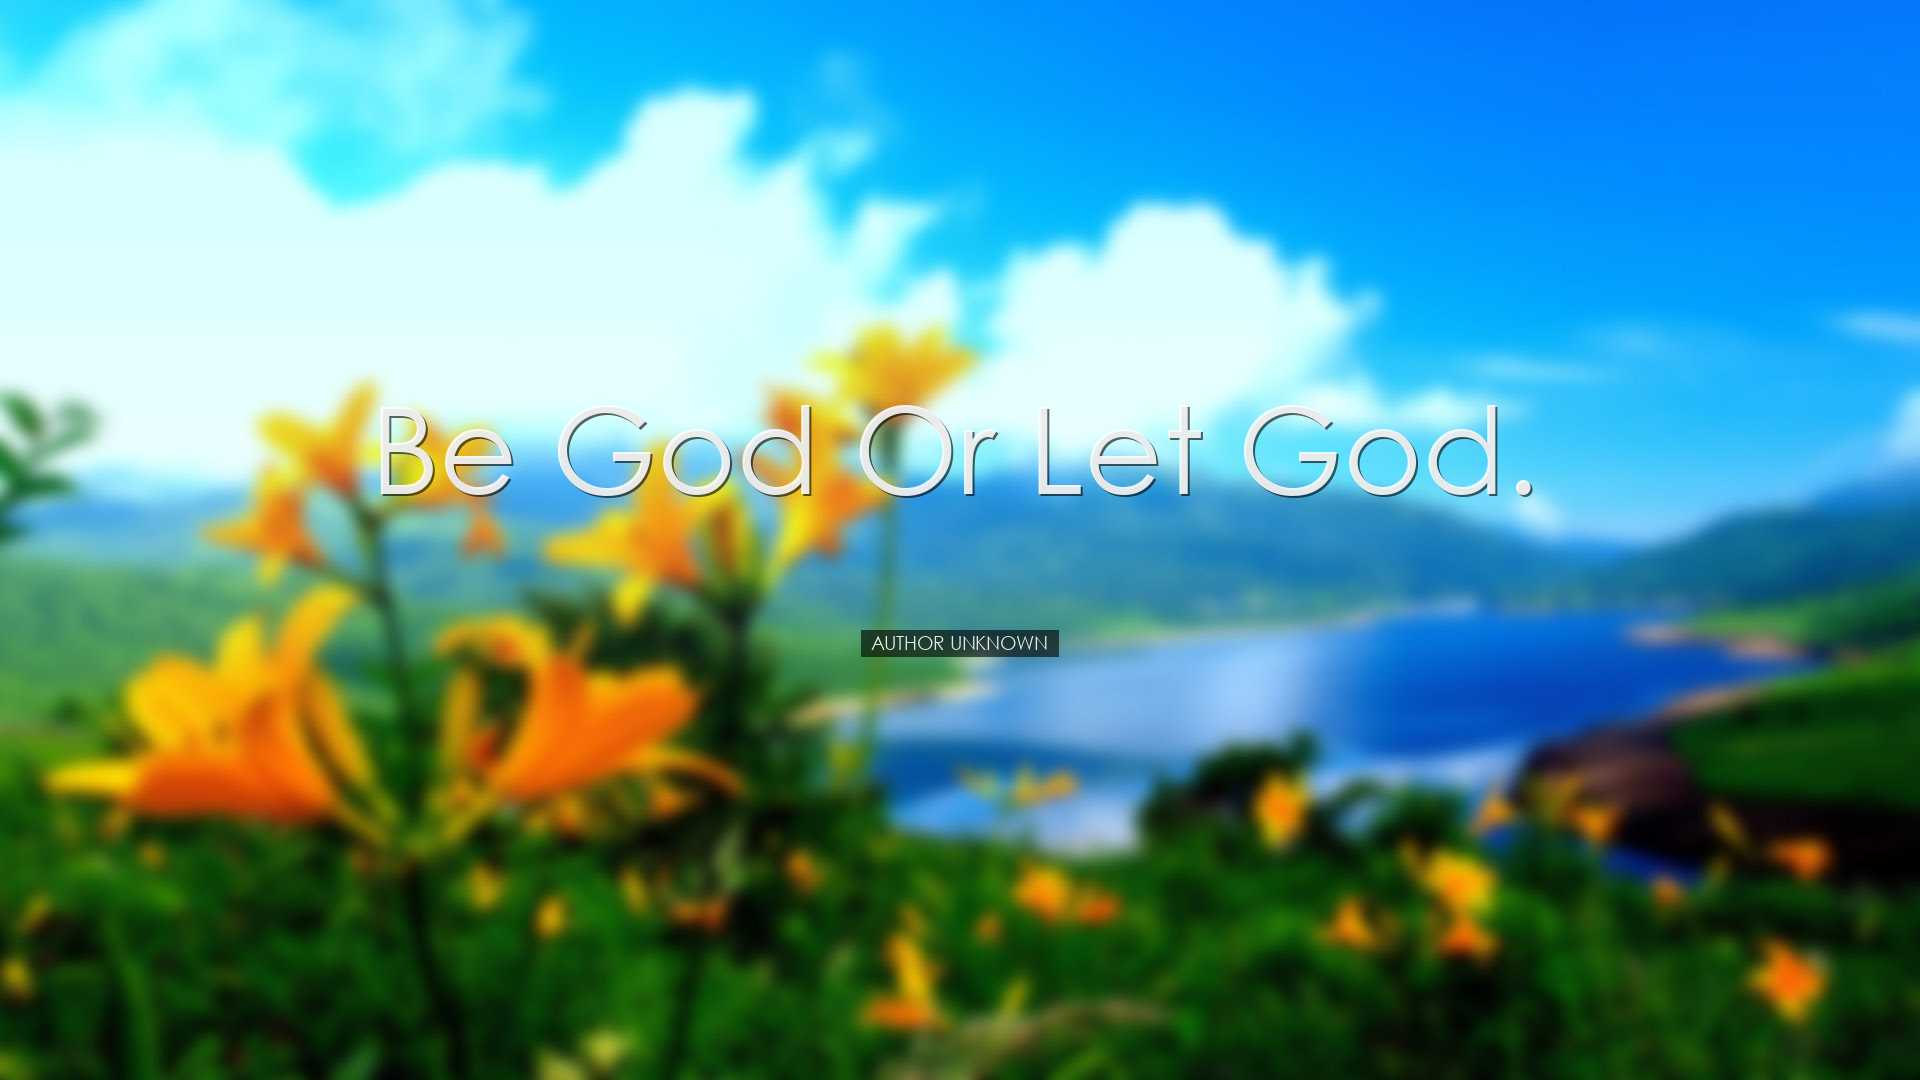 Be God or let God. - Author Unknown